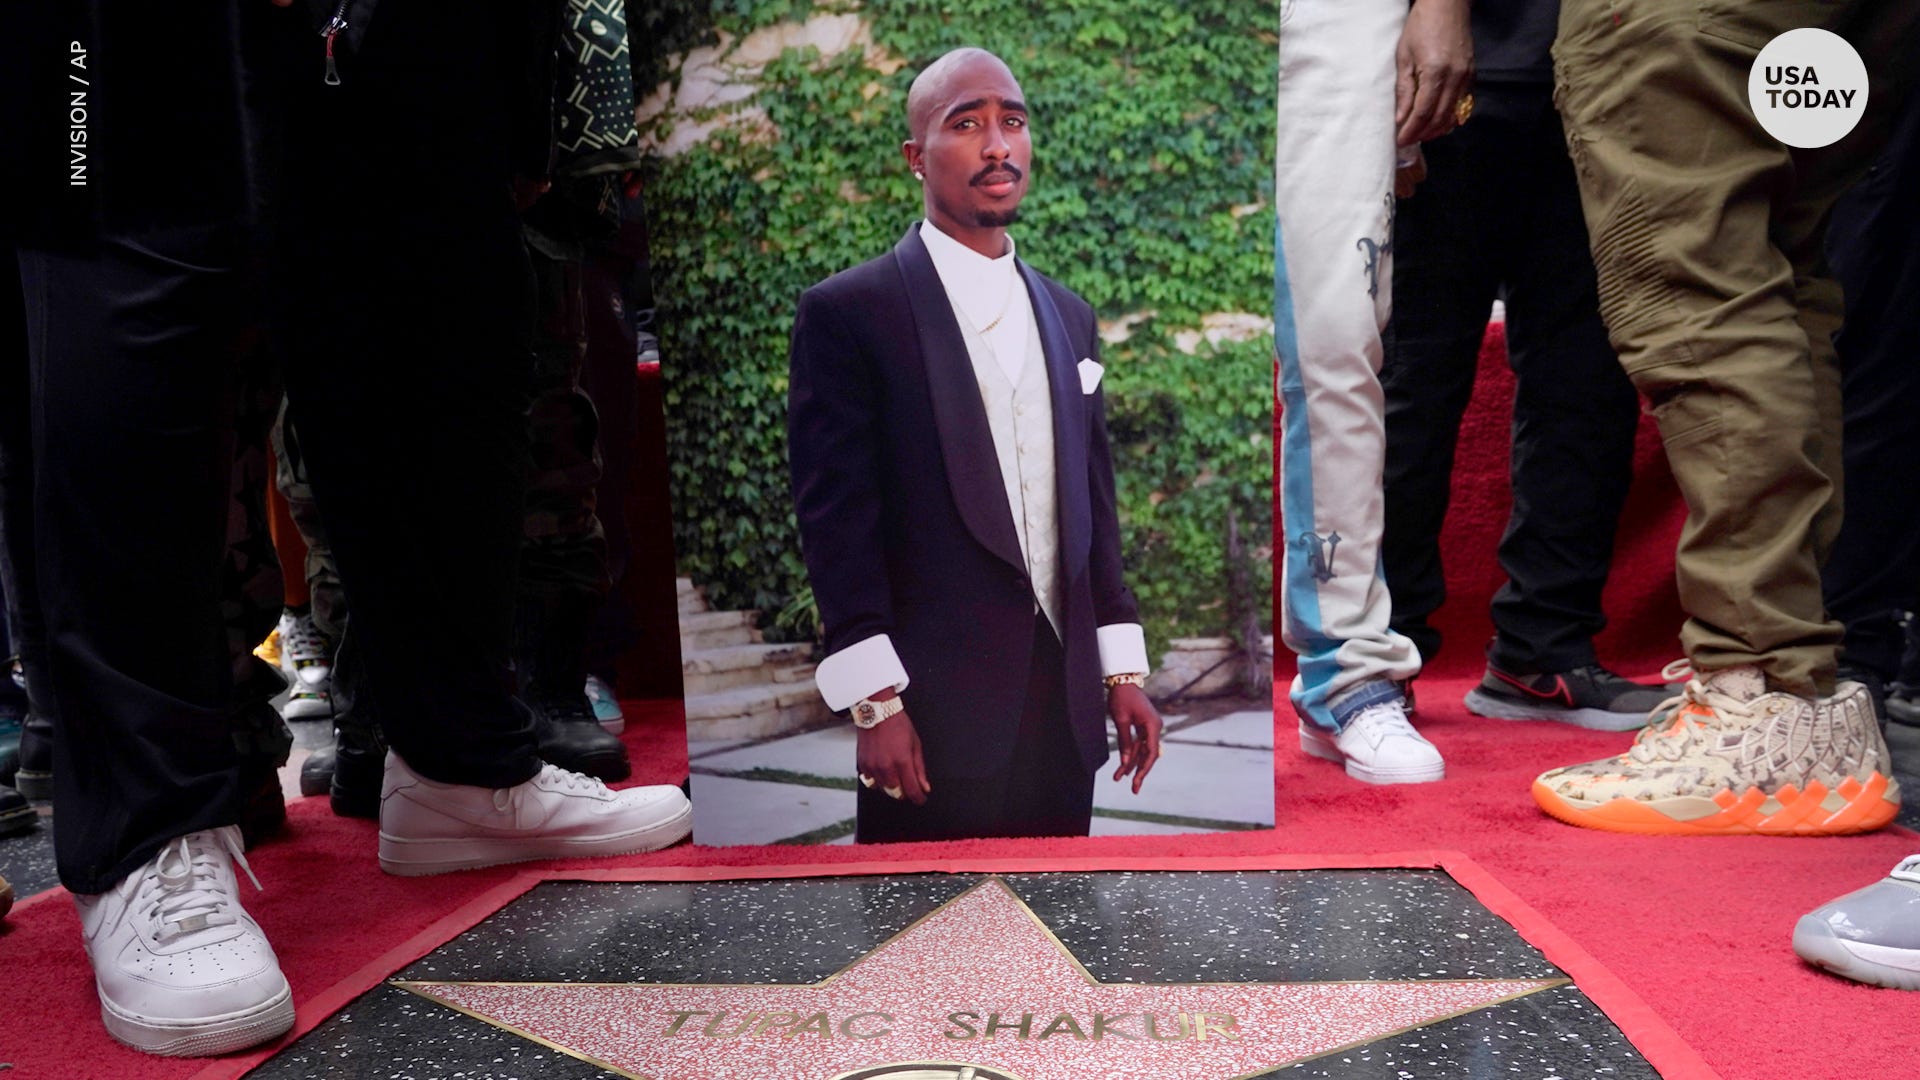 Late rapper <a href="https://www.usatoday.com/story/entertainment/music/2023/06/07/watch-tupac-shakur-hollywood-walk-of-fame-ceremony/70298424007/">Tupac Shakur</a> received his star on the Hollywood Walk of Fame on June 7, 2023.